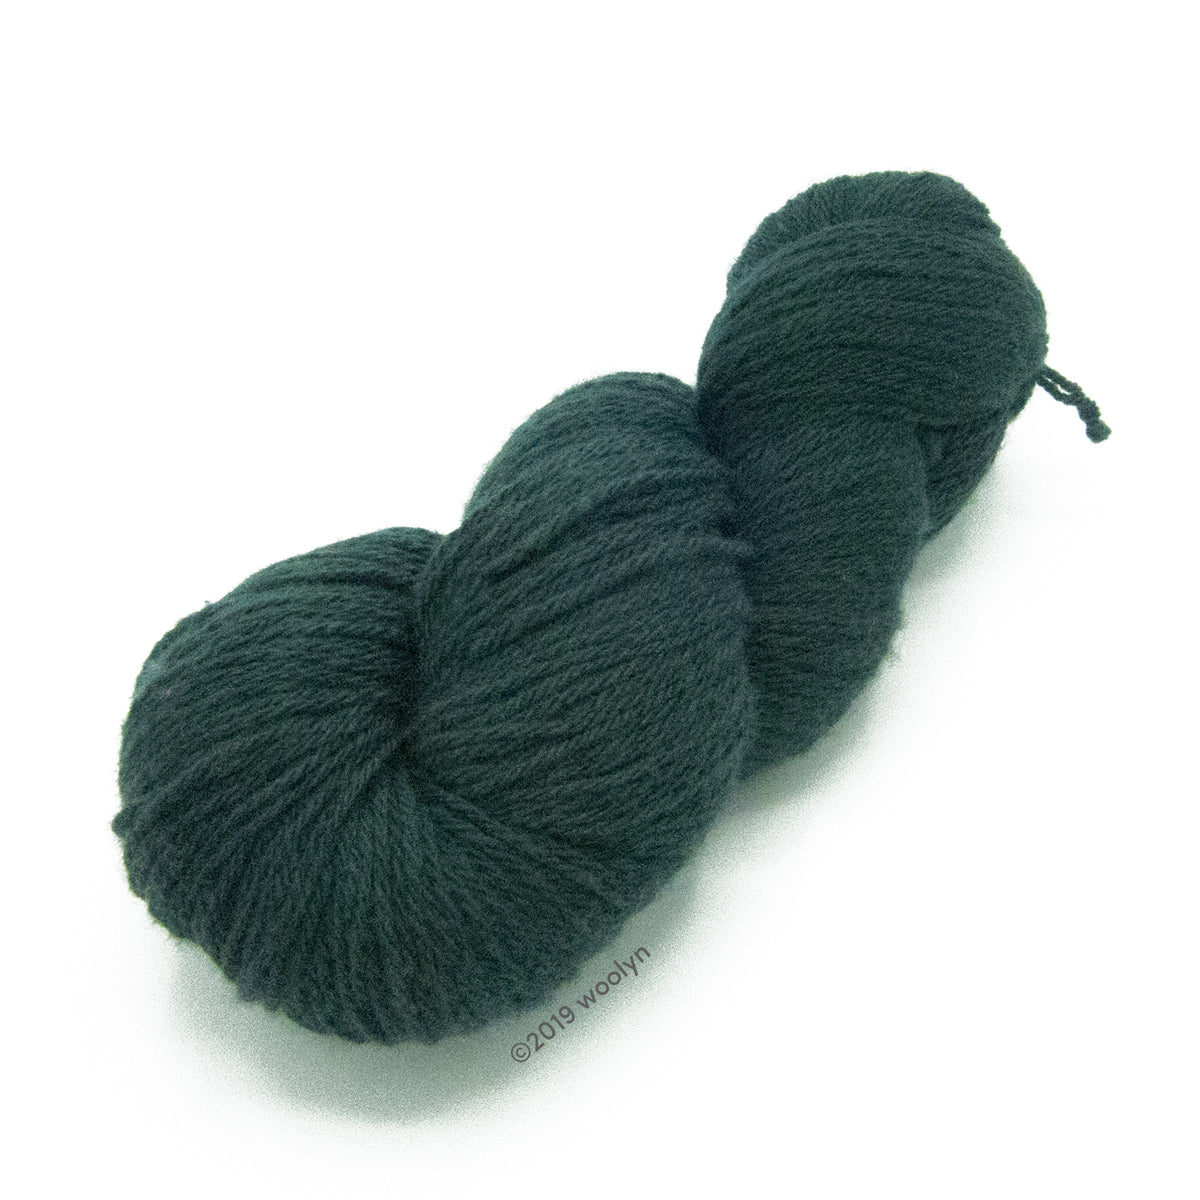 North Light Fibers Spring St in Spruce, a dark green color.